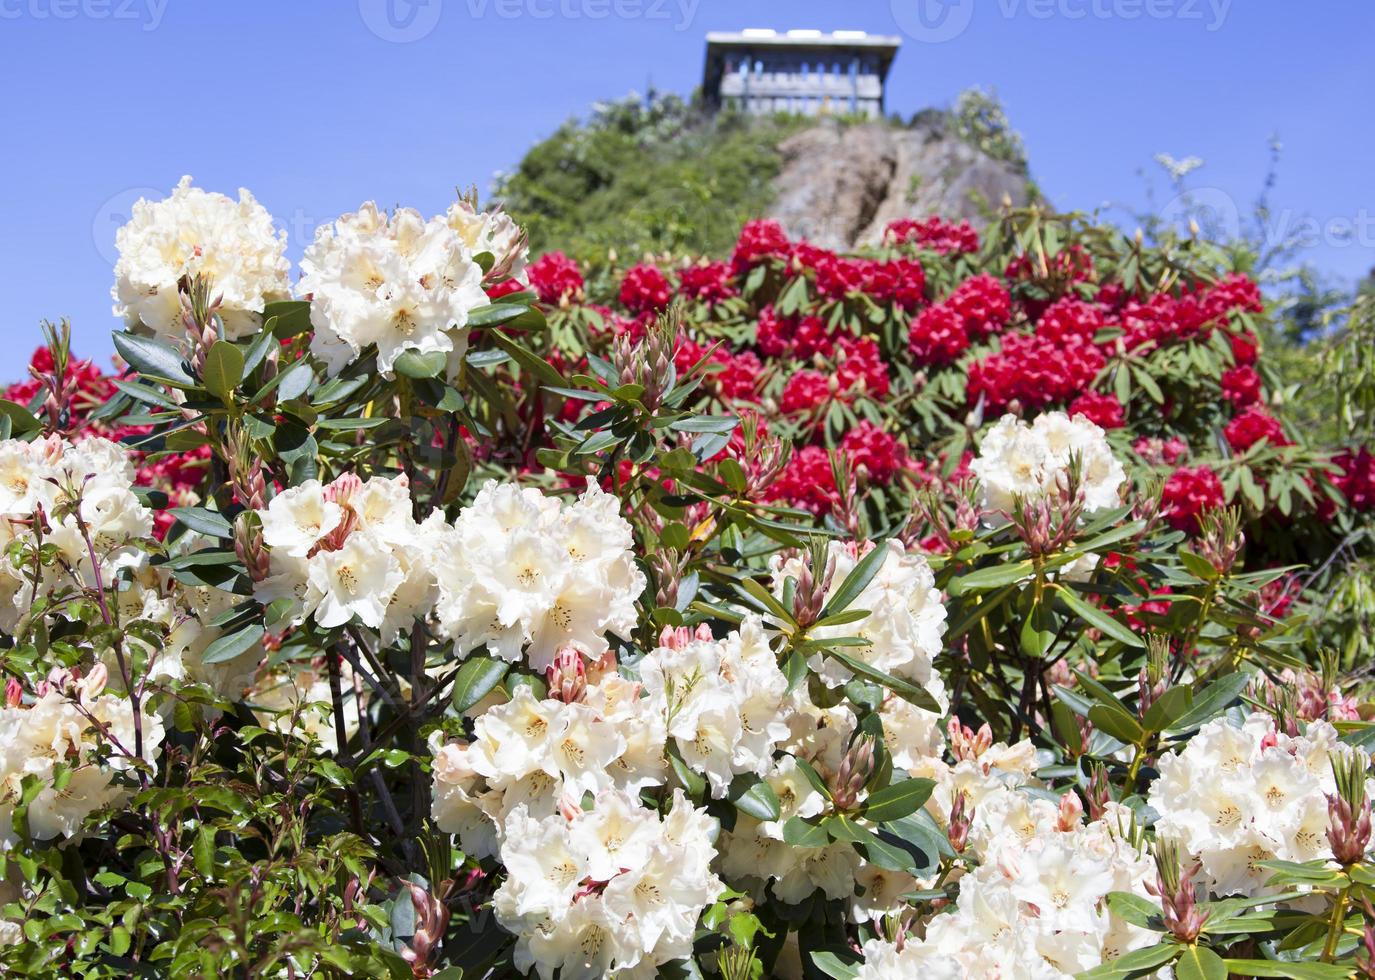 Port Chalmers Town Lady Thorn Rhododendron Dell Flowers photo